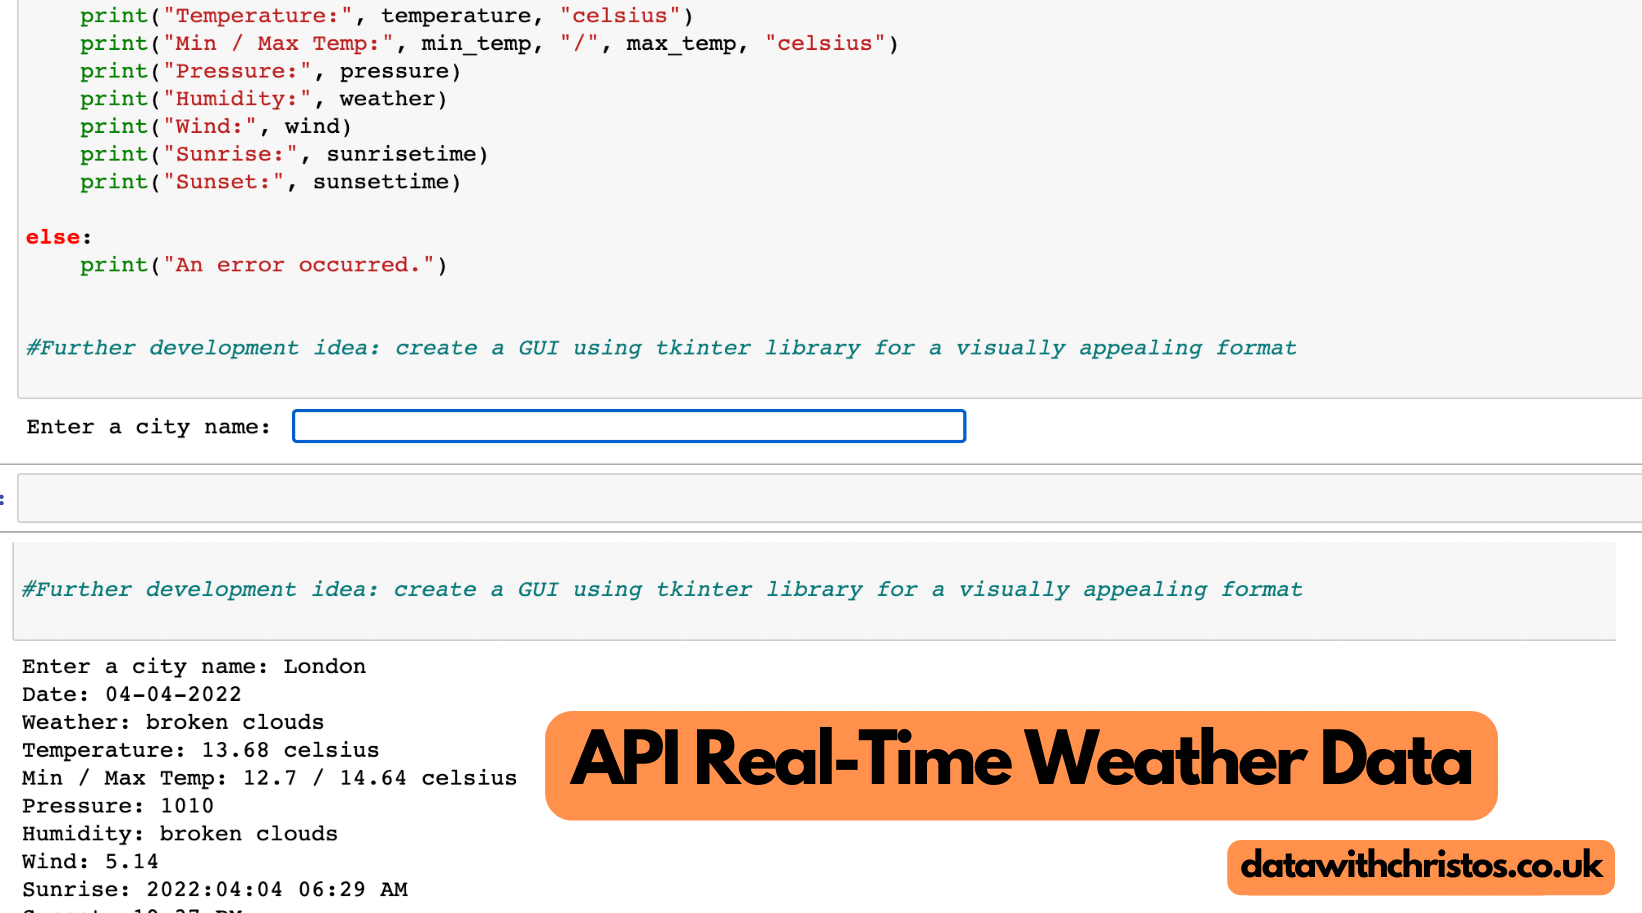 API Real-Time Weather Data